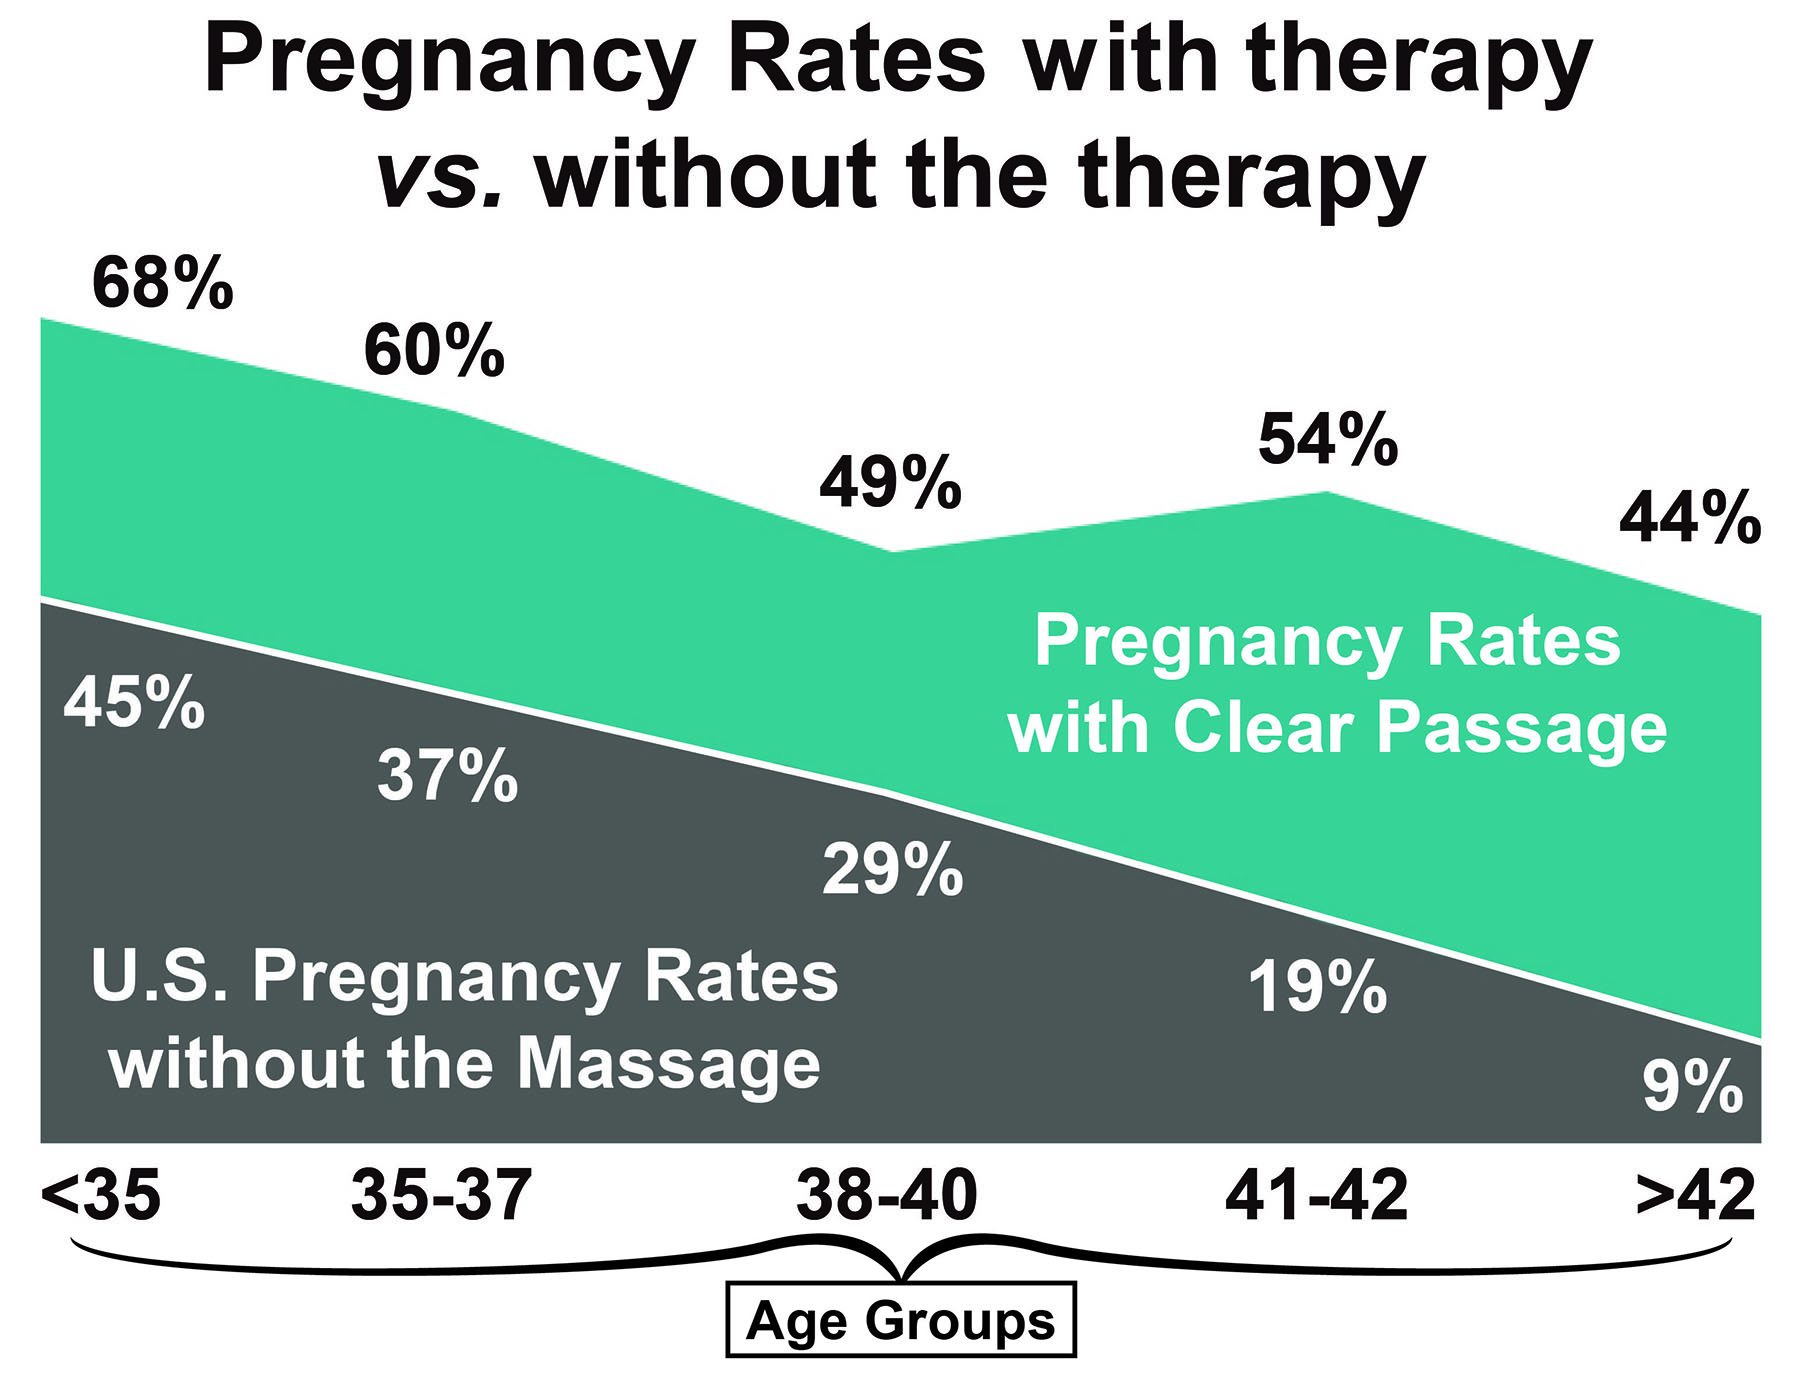 The innovative massage increased IVF pregnancy rates significantly in all age groups. 